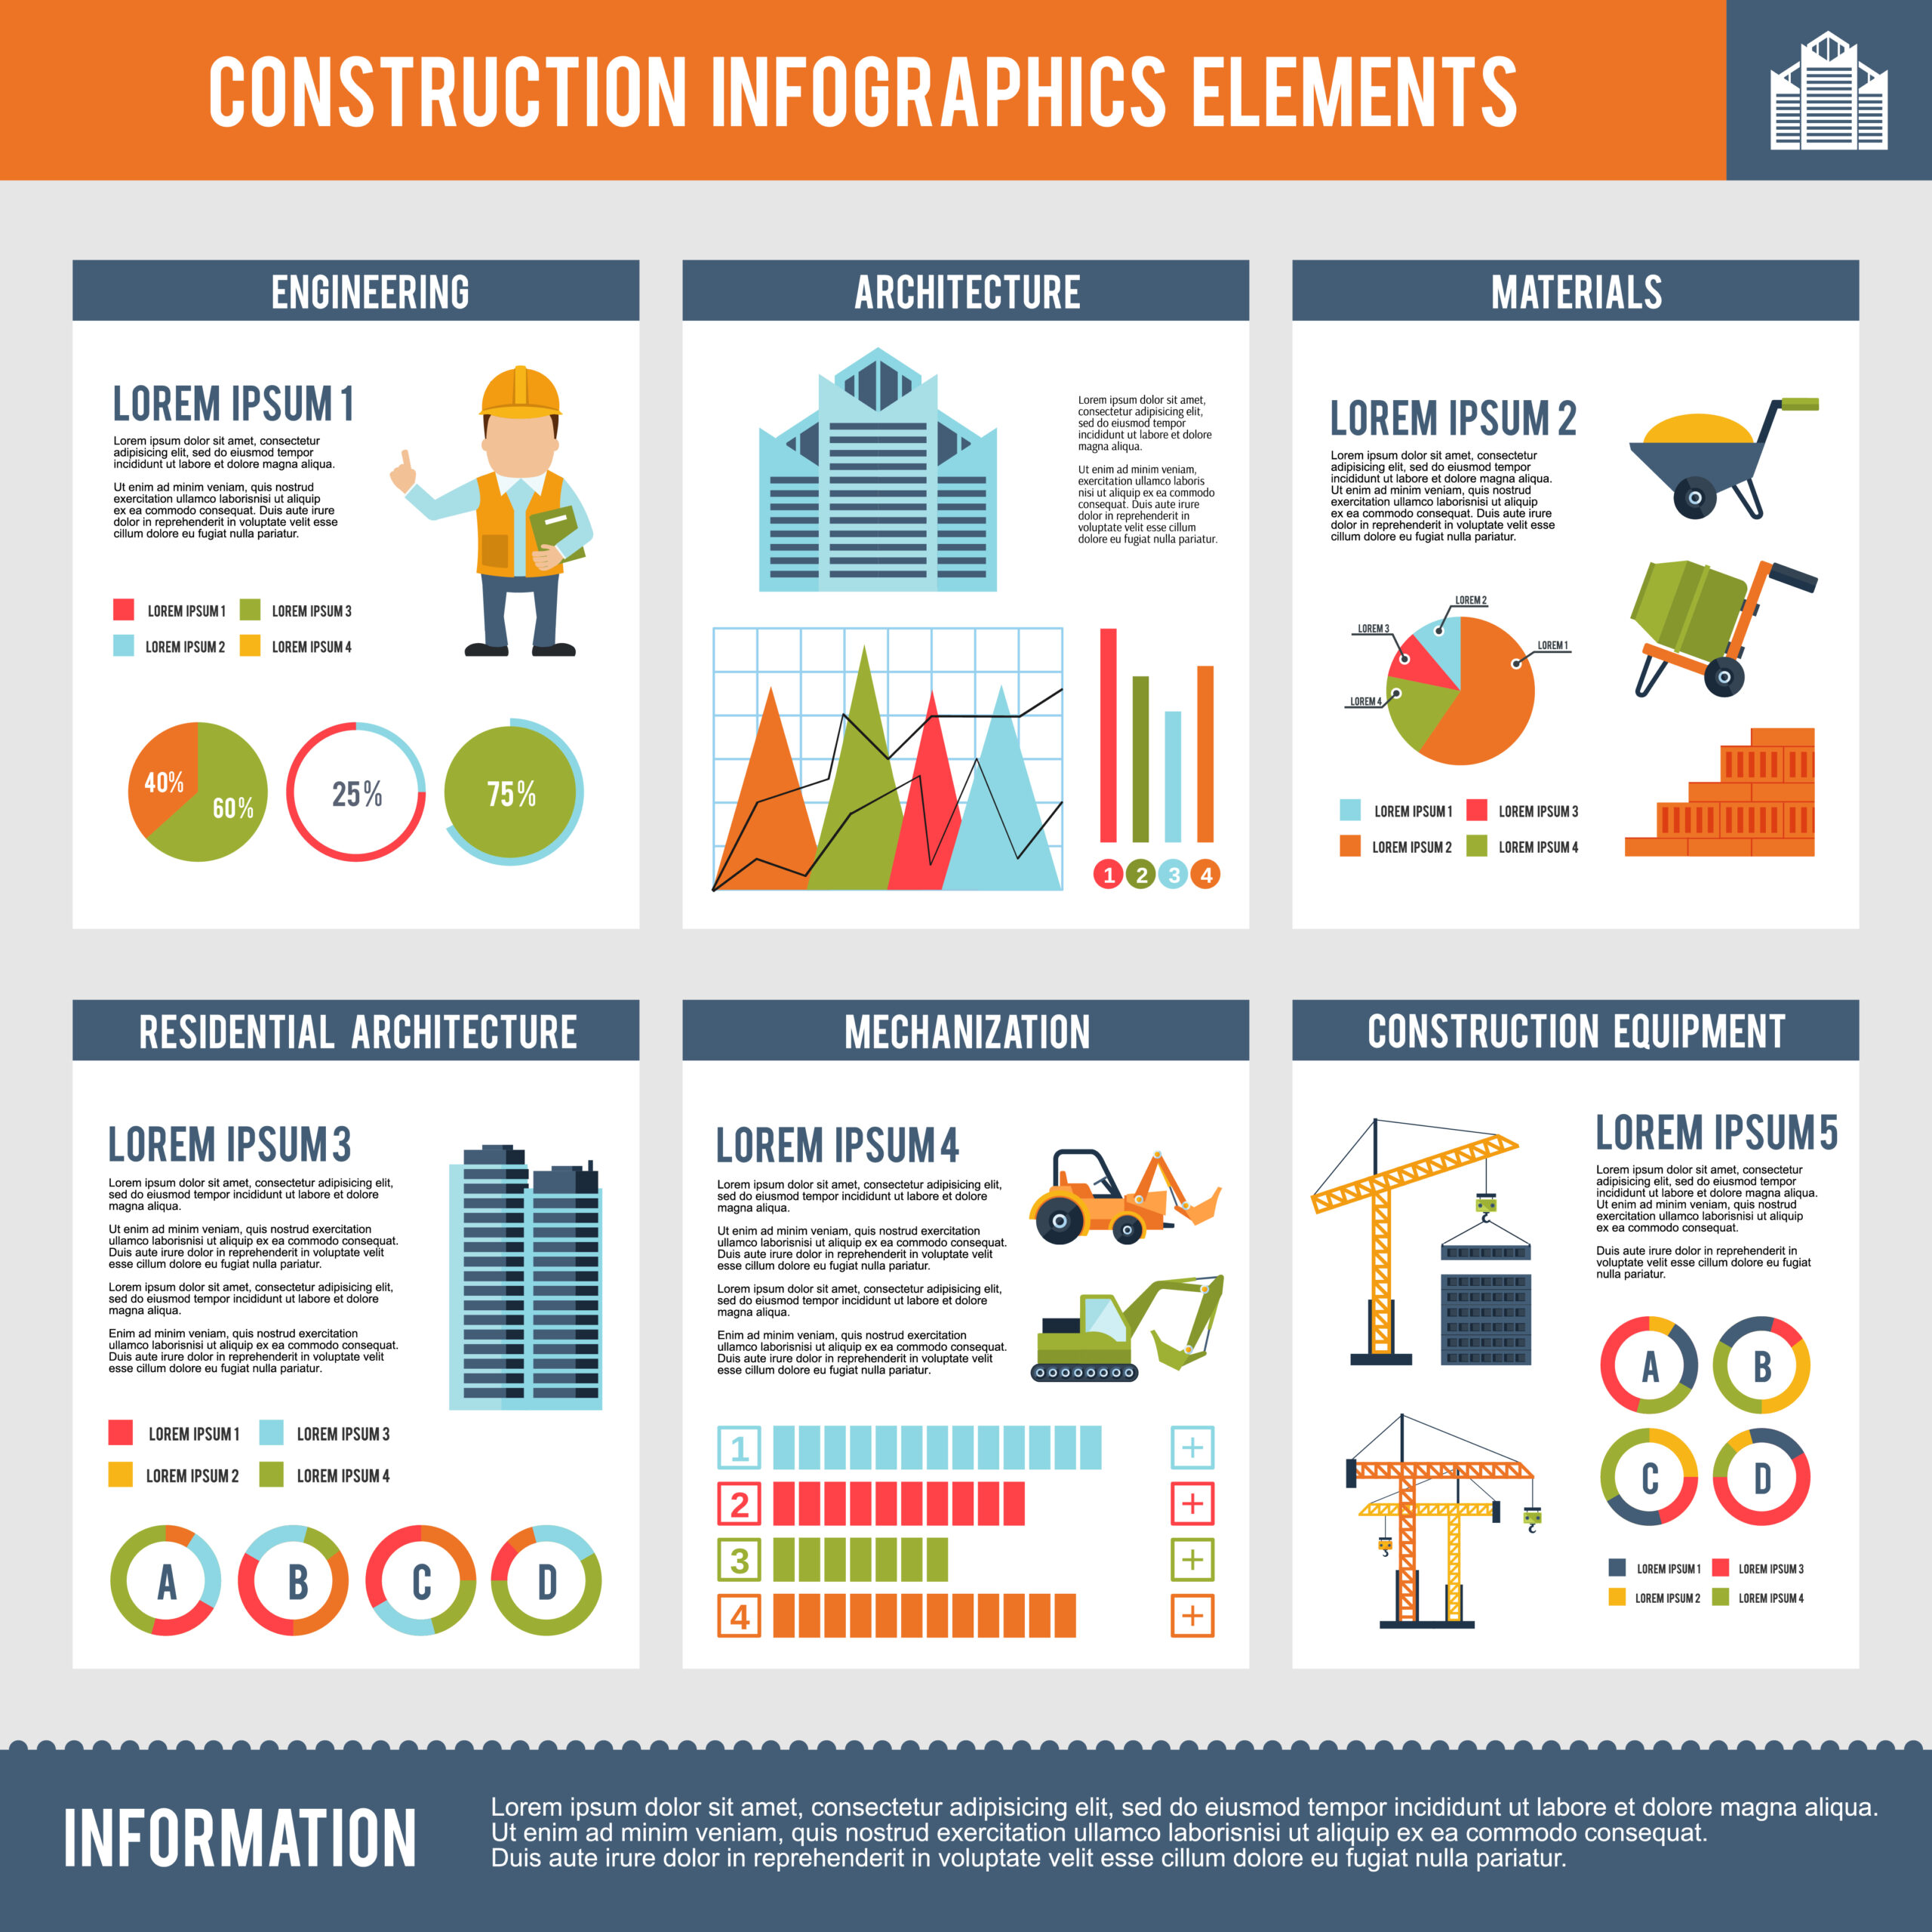 [Infographic] 8 Surefire Ways to Attract Millennials to Your Construction Business - Small ...